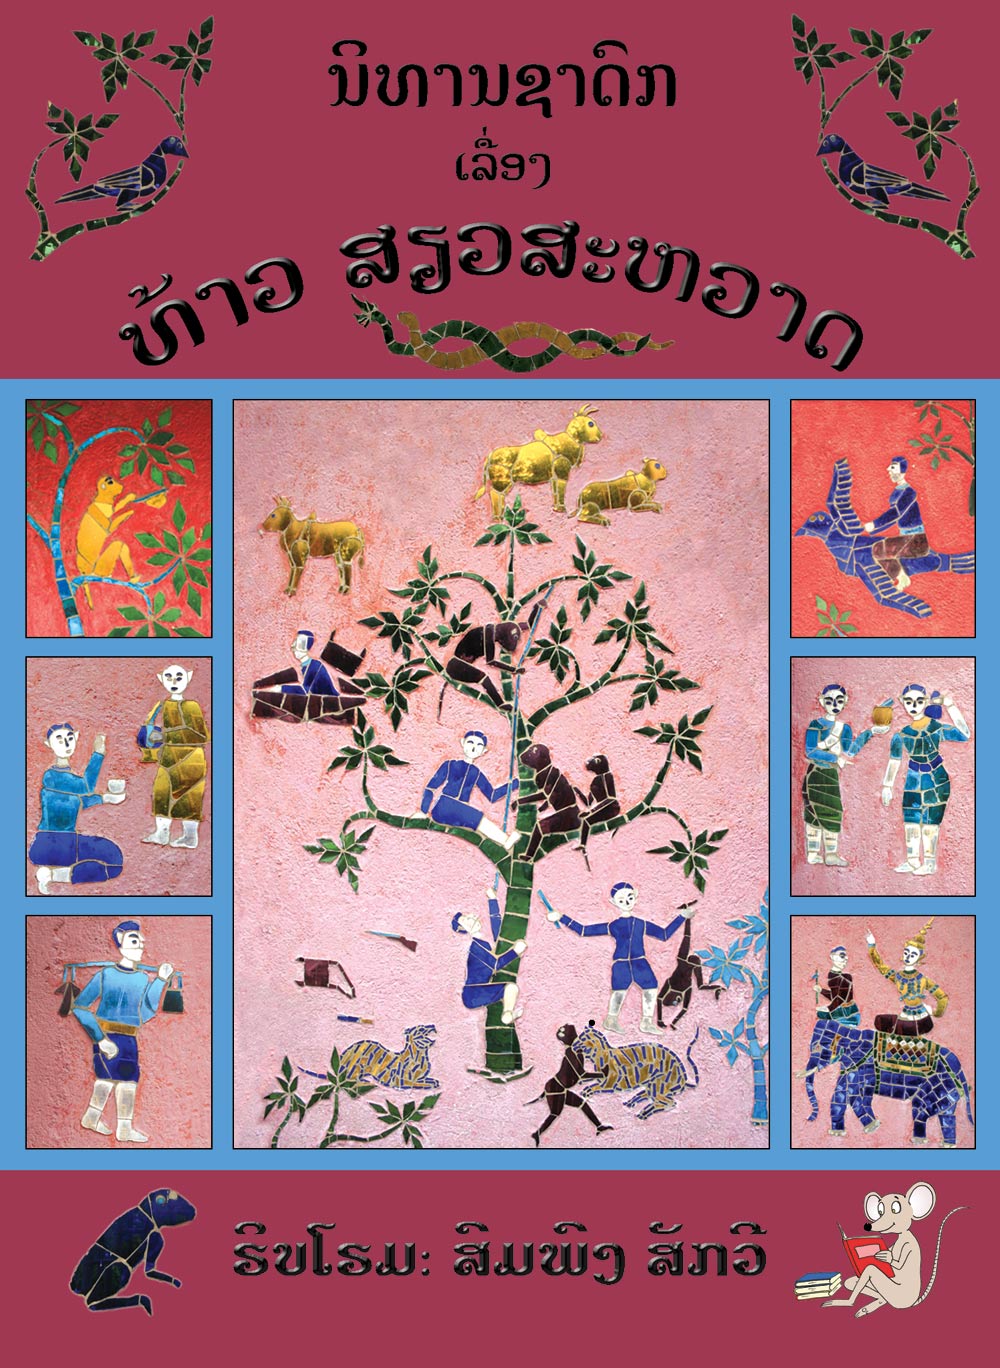 Wat Xieng Thong large book cover, published in Lao language